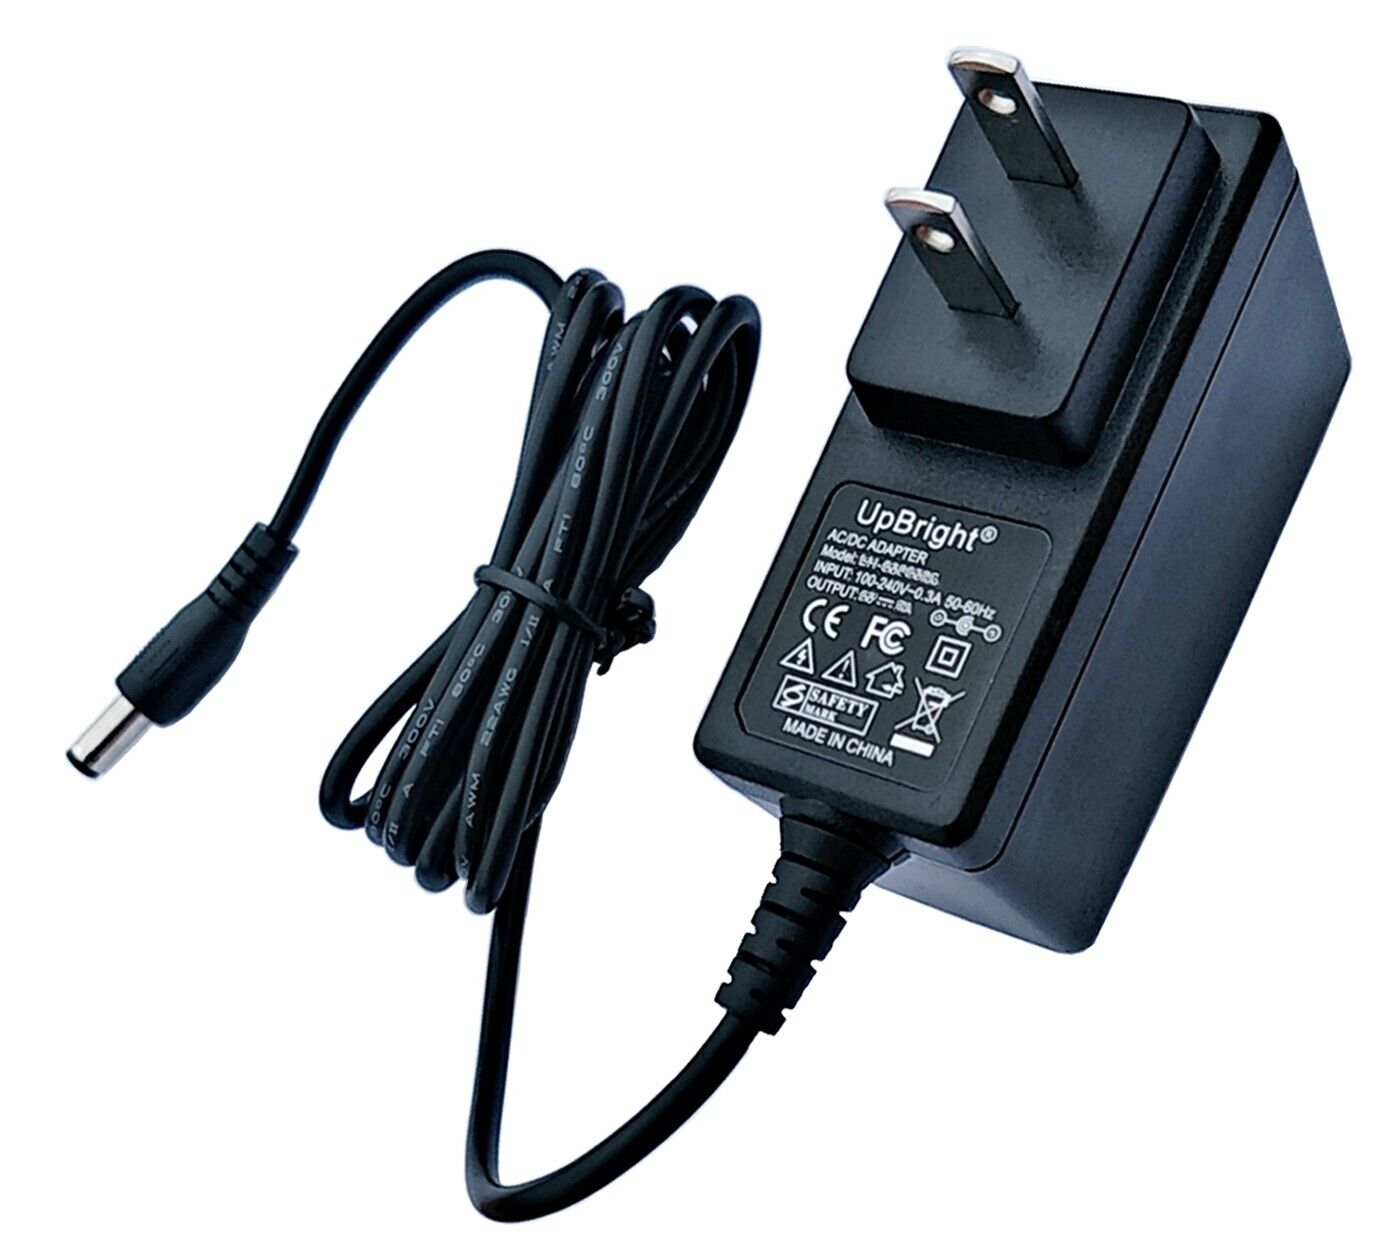 DC12V AC Adapter For firman who3242 2322024 3200 WATT Portable Generator Charger